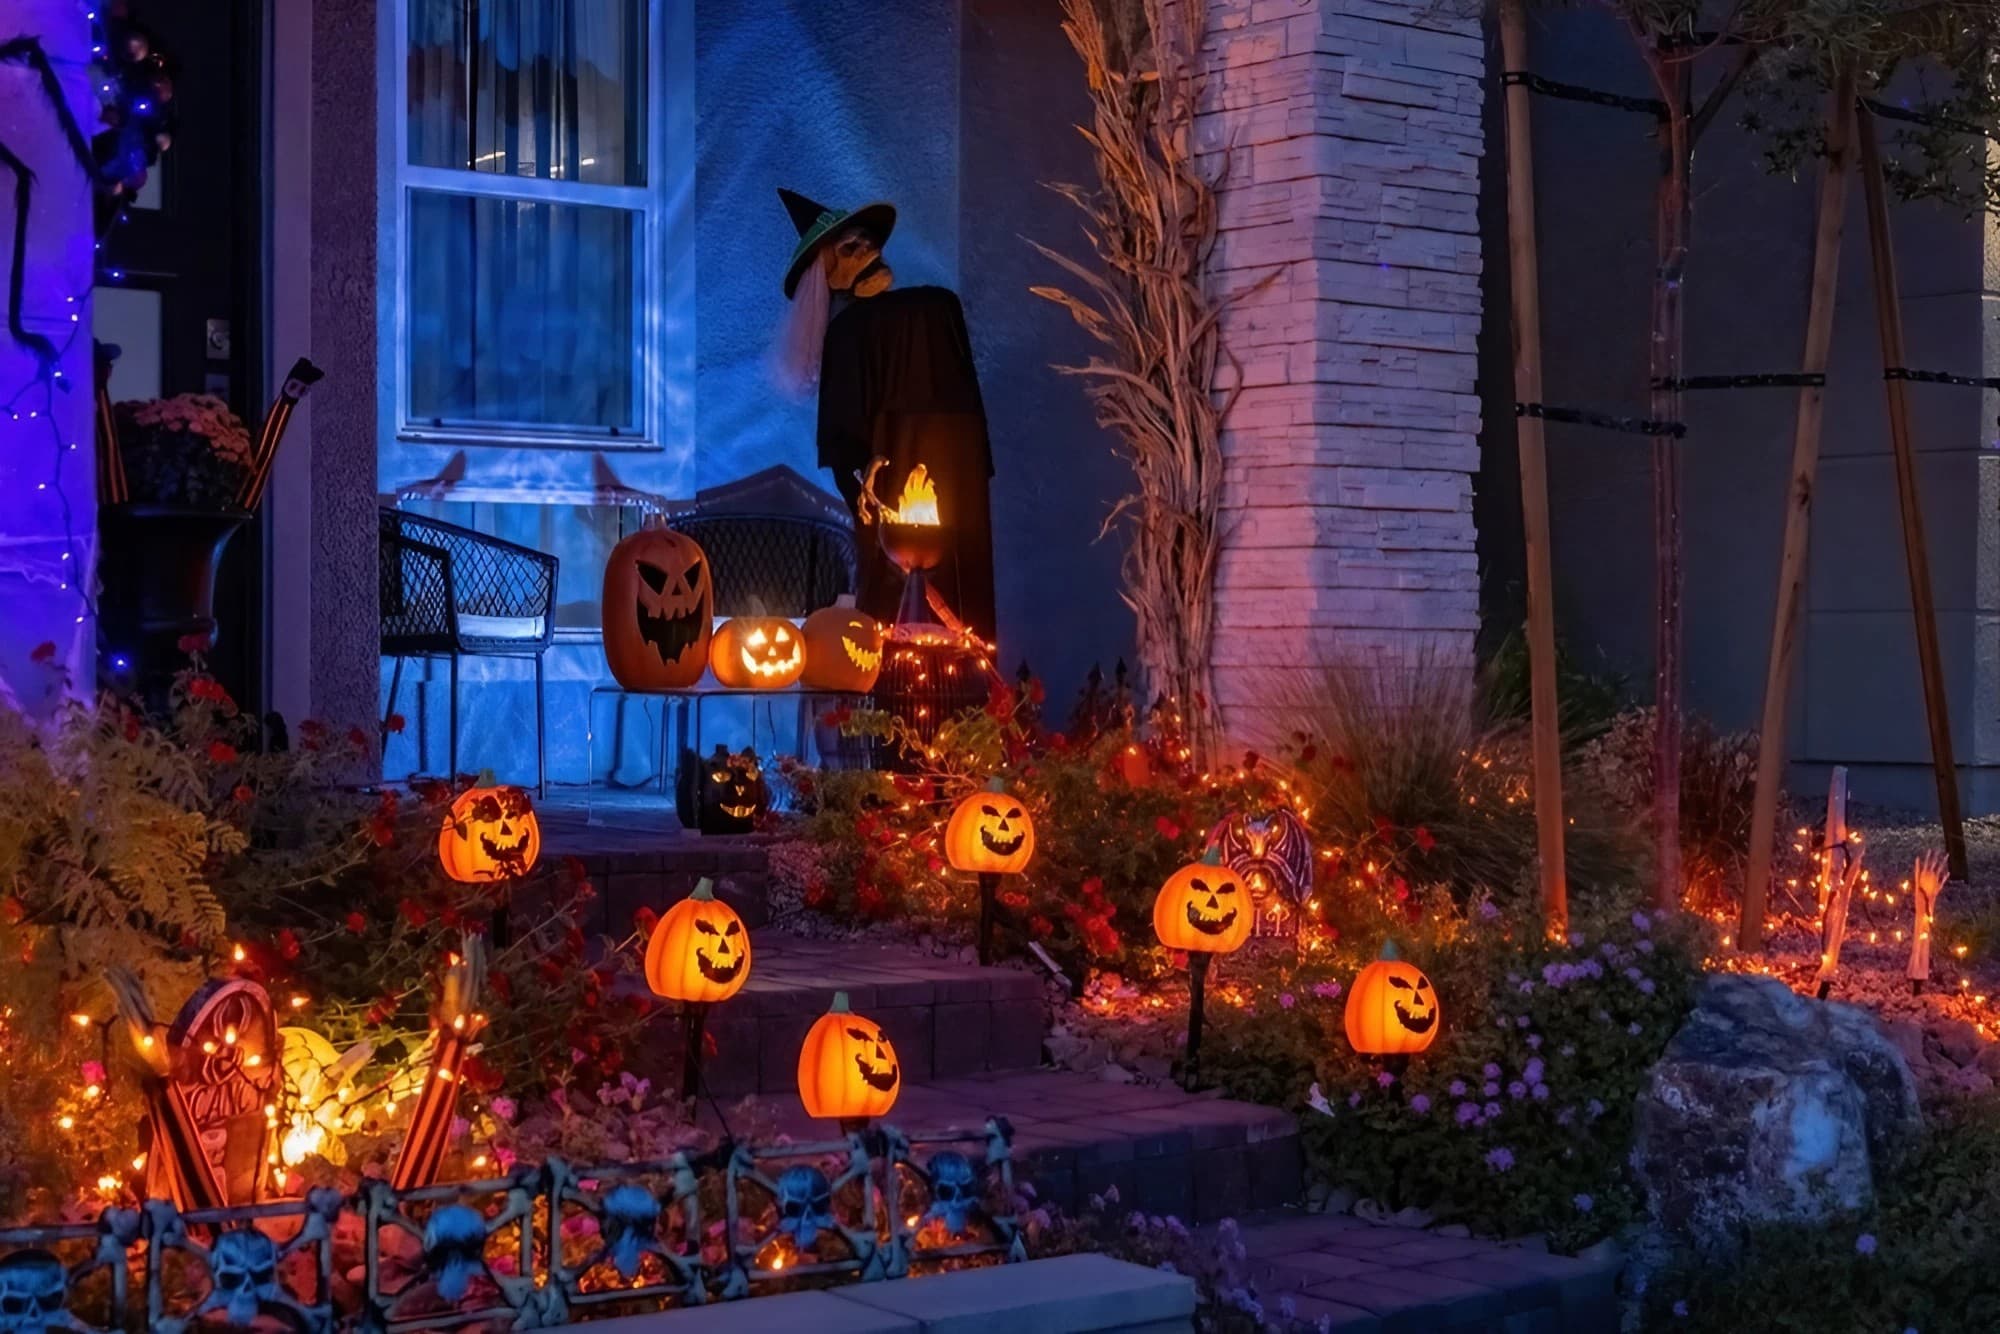 2023 Best Halloween Decorations to Transform Your Home/Yard